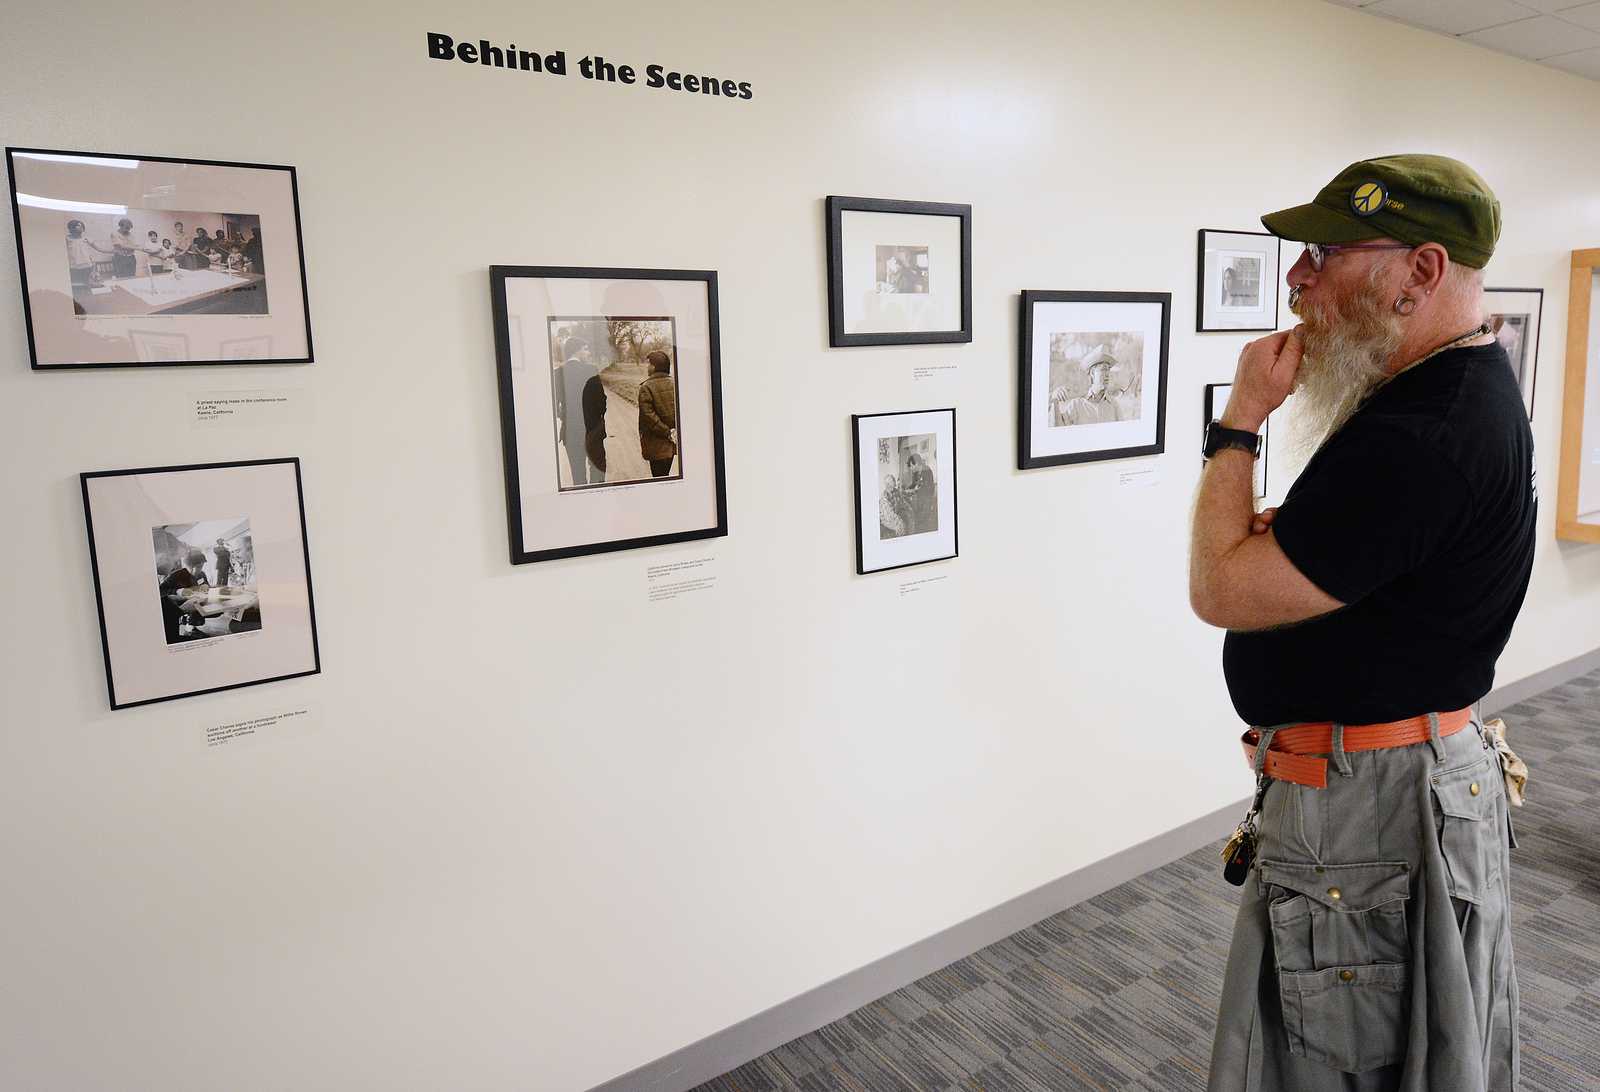 Woody Miller, graduate student, observes photographs in the Marching Through History with Cesar Chavez and the Farm Workers exhibit at J. Paul Leonard Library on Monday, Sept. 16, 2013. Photo By Philip Houston / Xpress